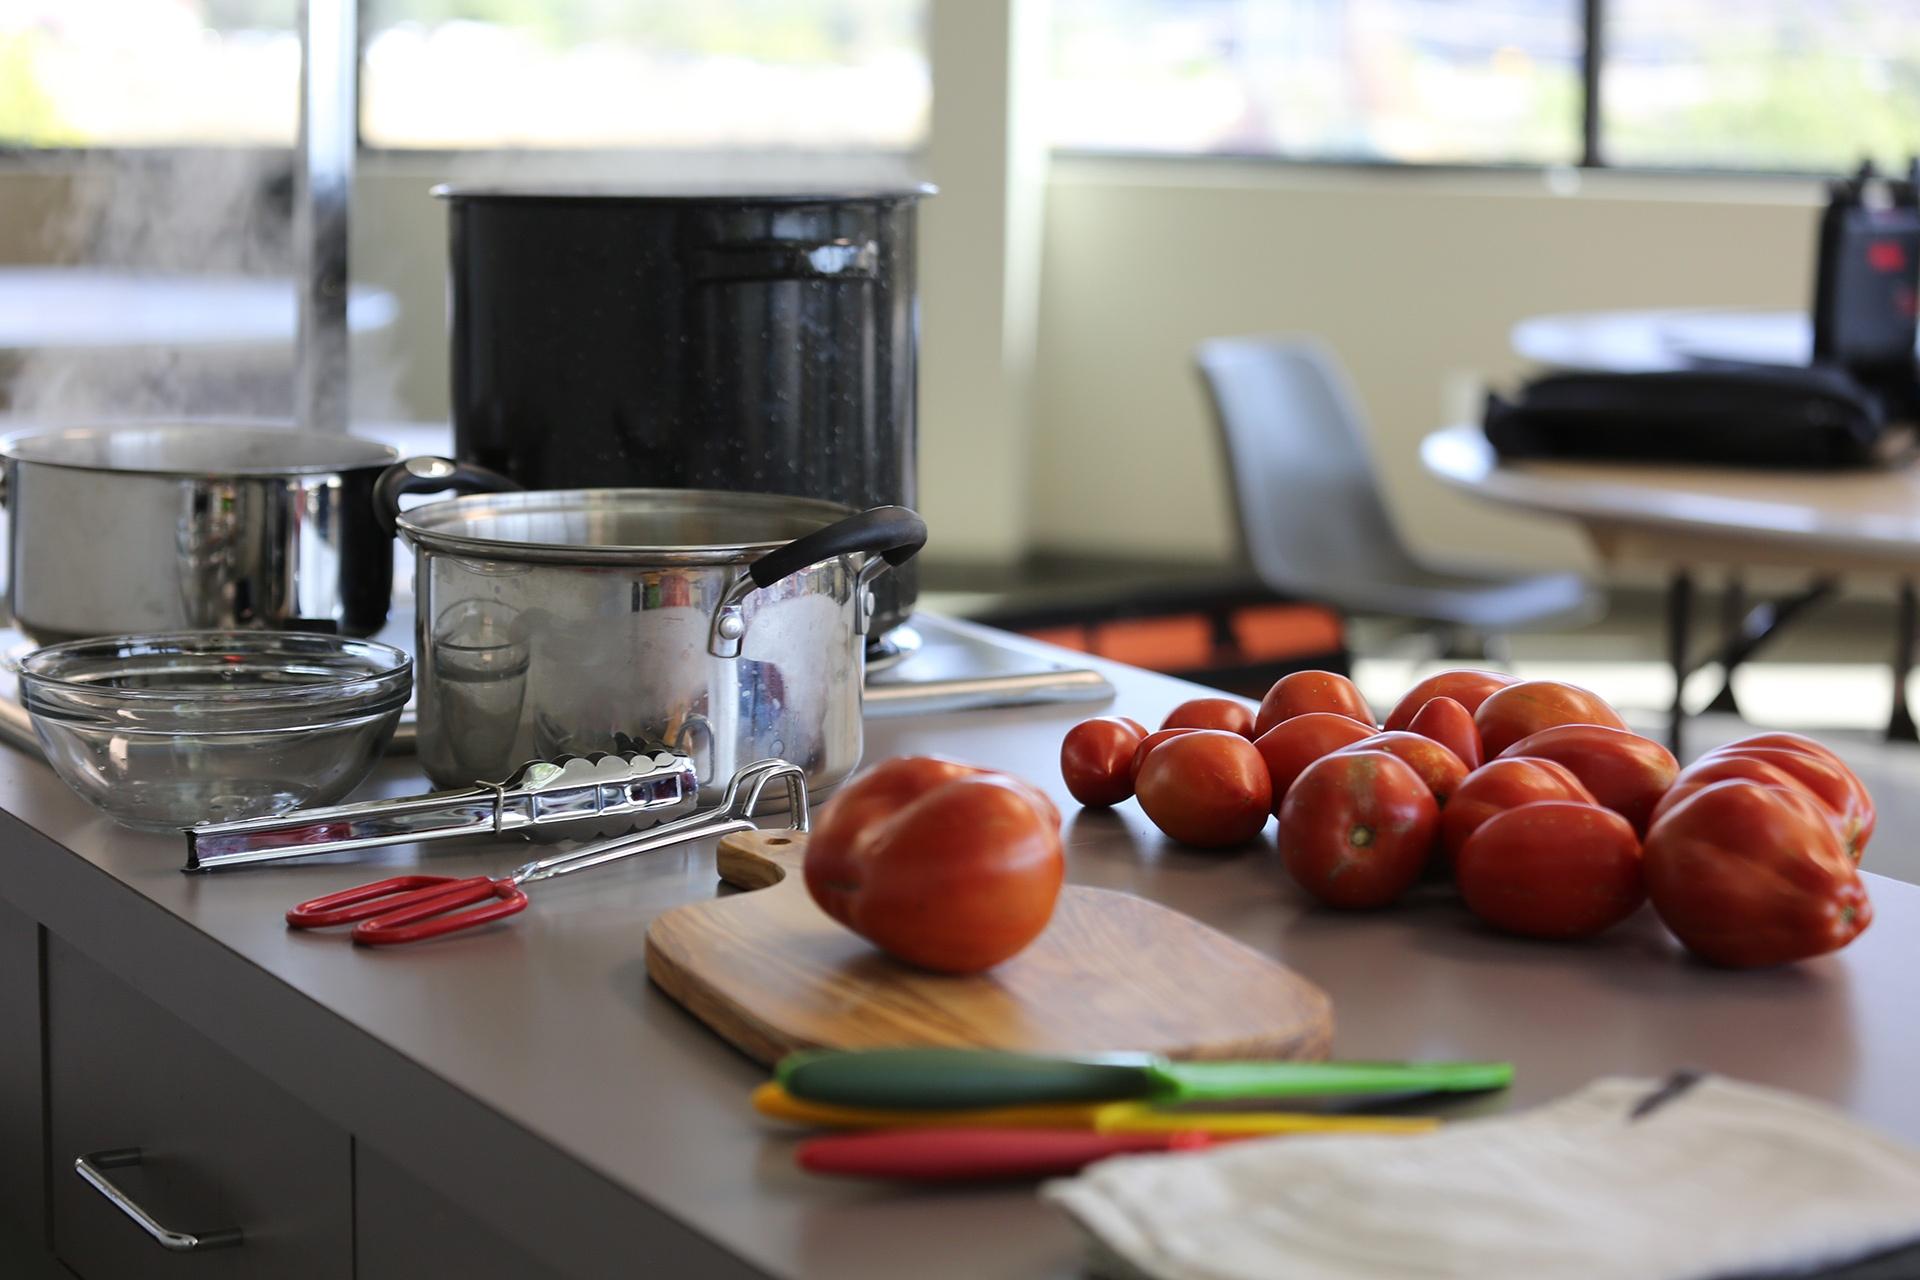 Set up for preparing tomatoes for canning with a large pot of boiling water for sanitizing jars, a pot of boiling water for blanching tomatoes, as well as an ice bath.